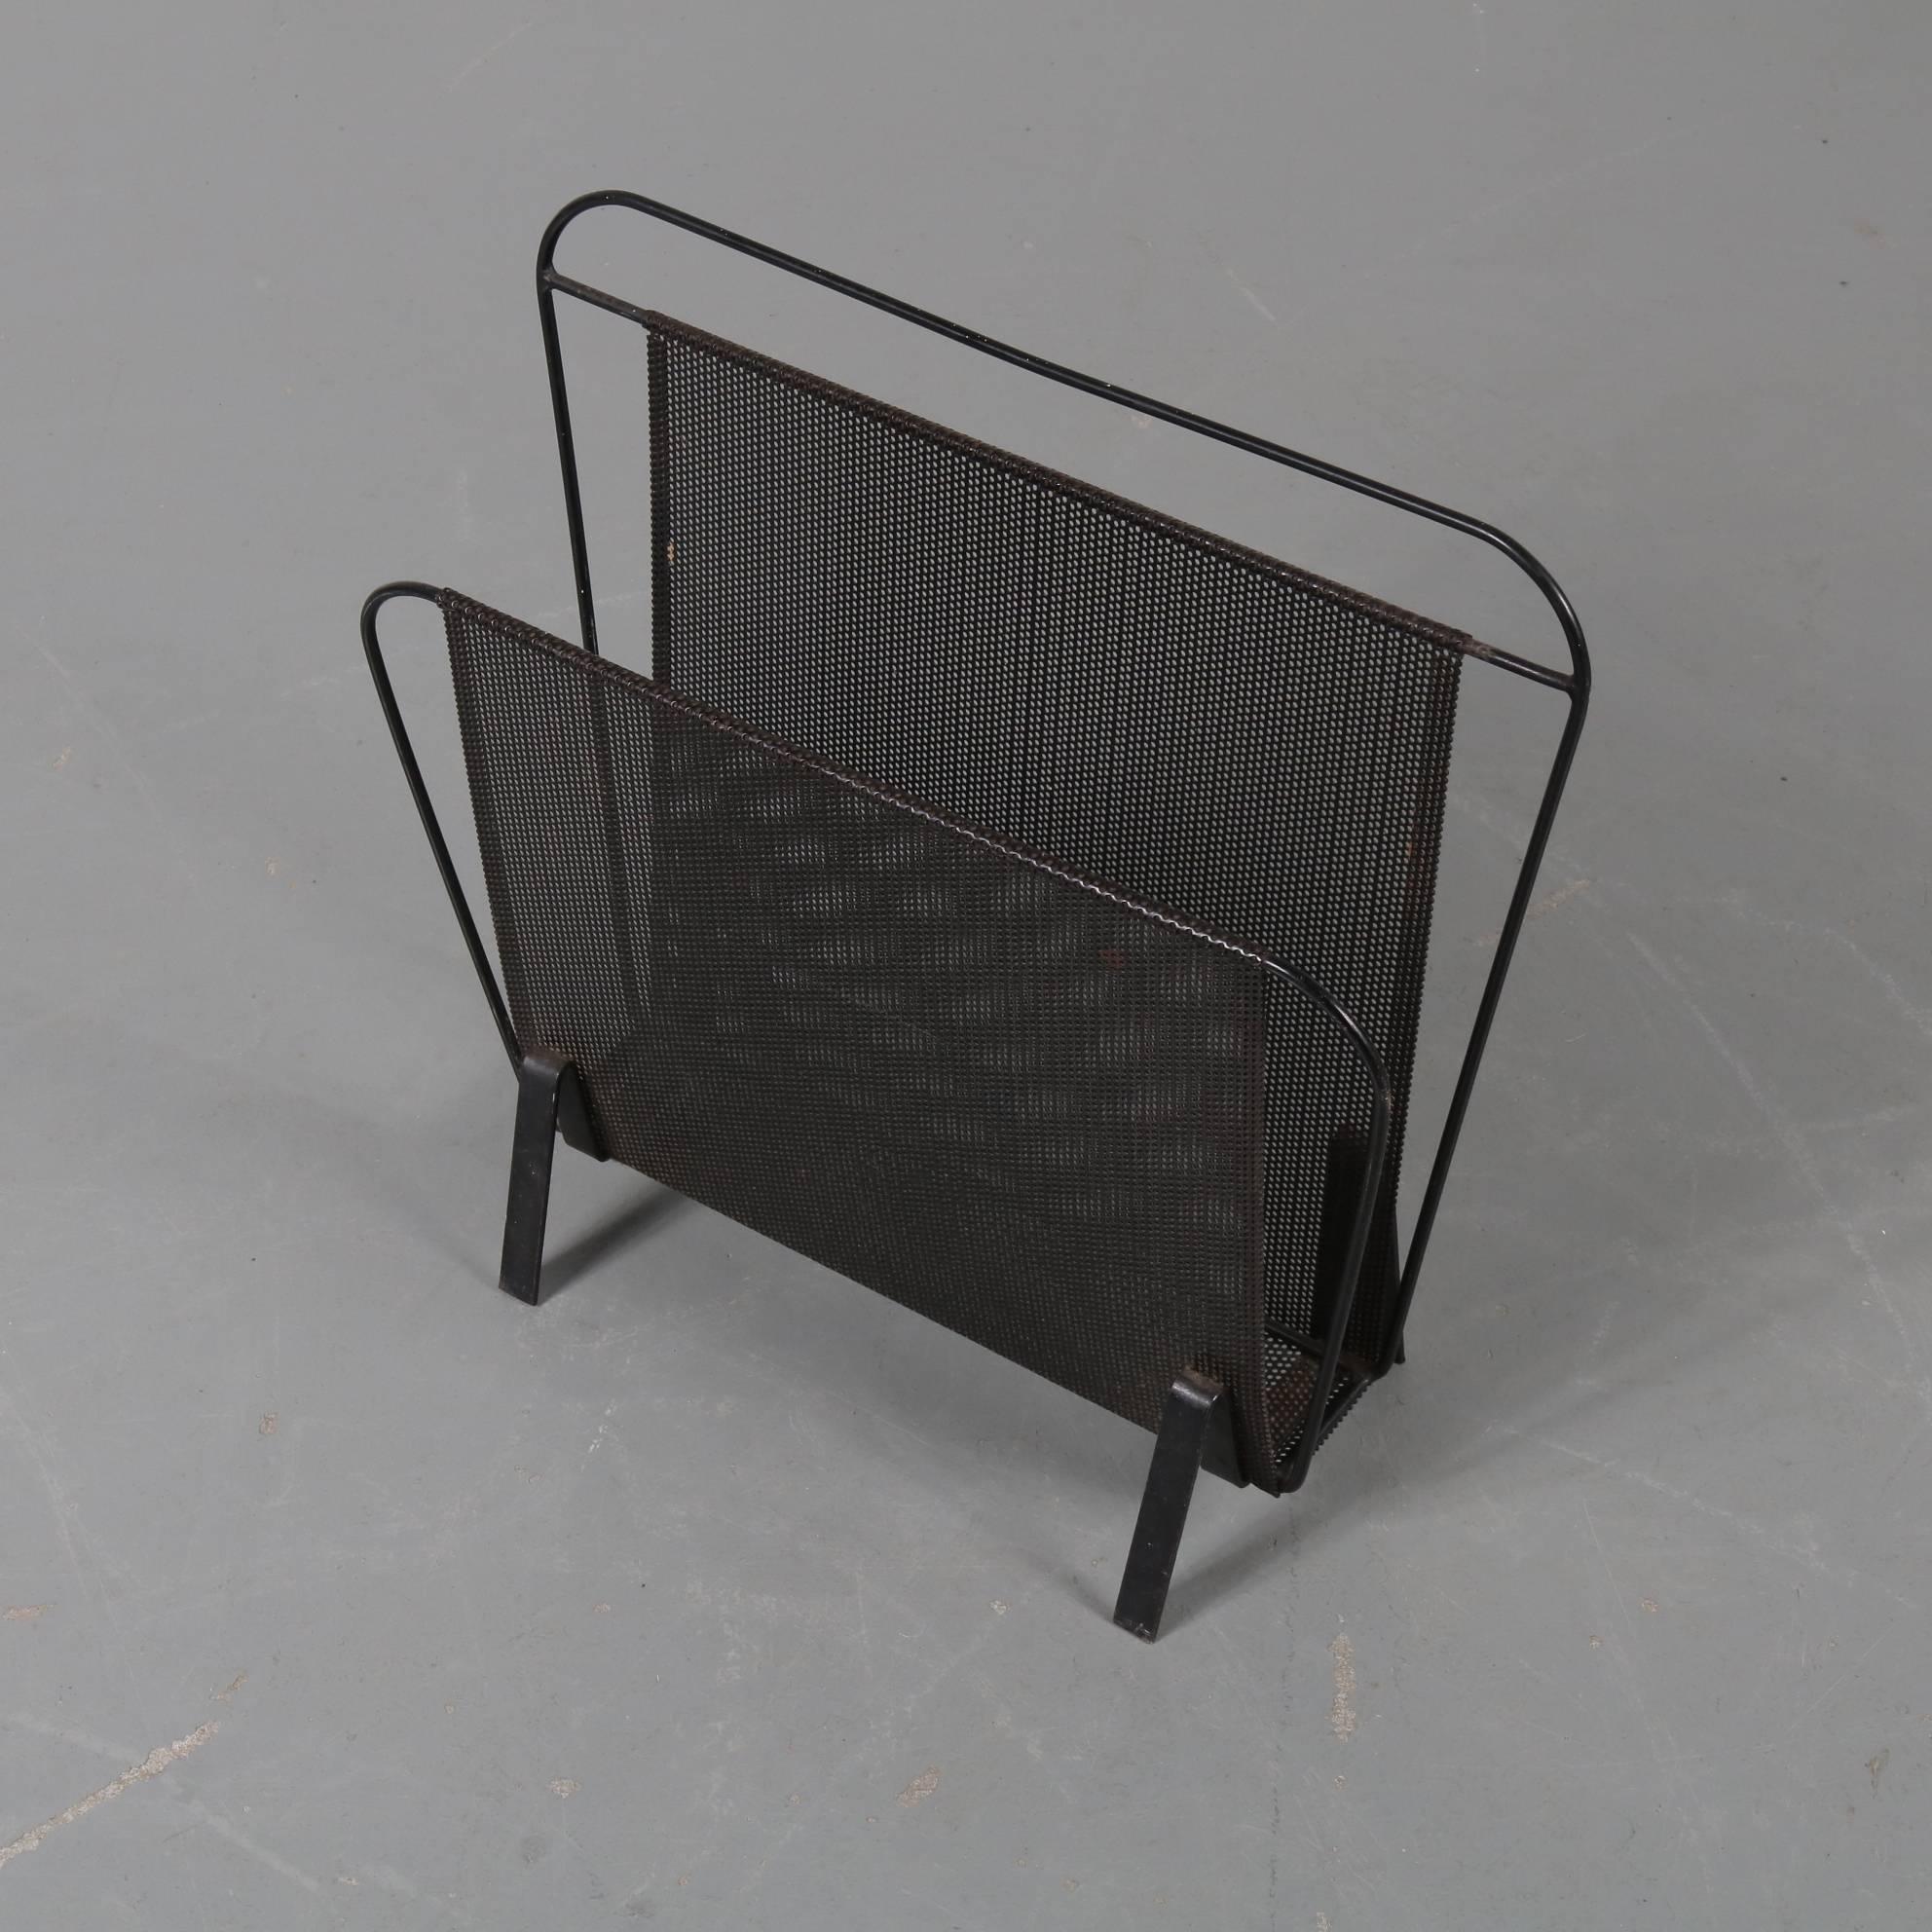 A beautiful elegant magazine rack, model Harpers, designed by Mathieu Matégot and manufactured by Artimeta in the Netherlands, circa 1950.

This iconic piece is made of high quality black lacquered metal. The structure is folded and the metal